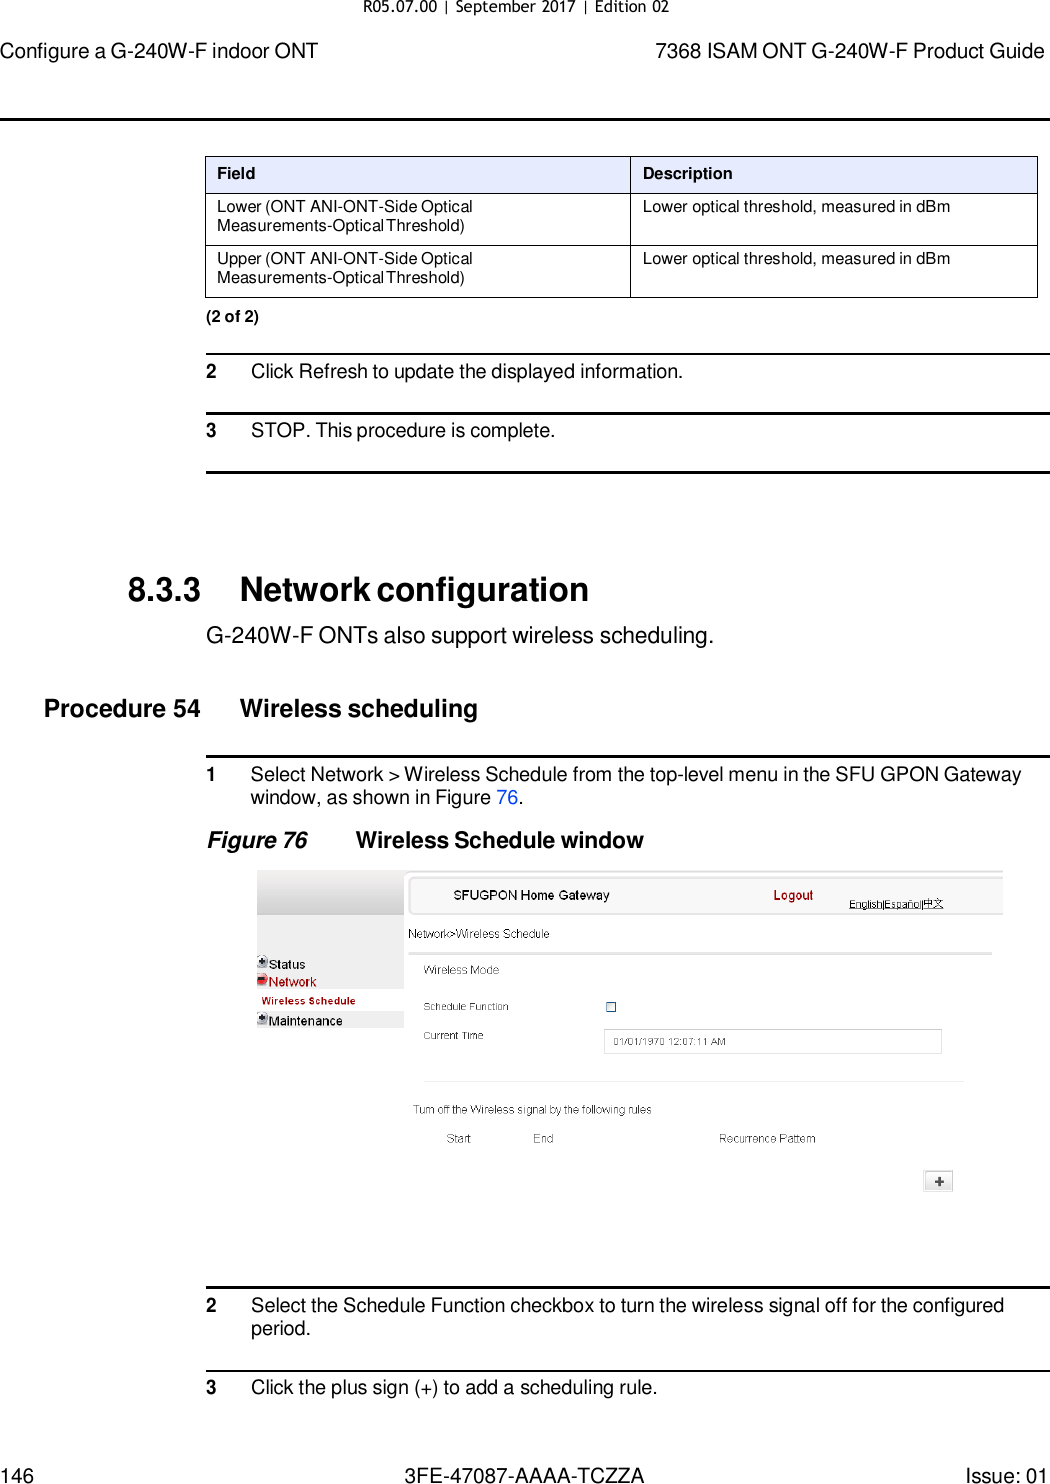 Page 140 of Nokia Bell G240WFV2 7368 ISAM GPON ONU User Manual 7368 ISAM ONT G 240W F Product Guide